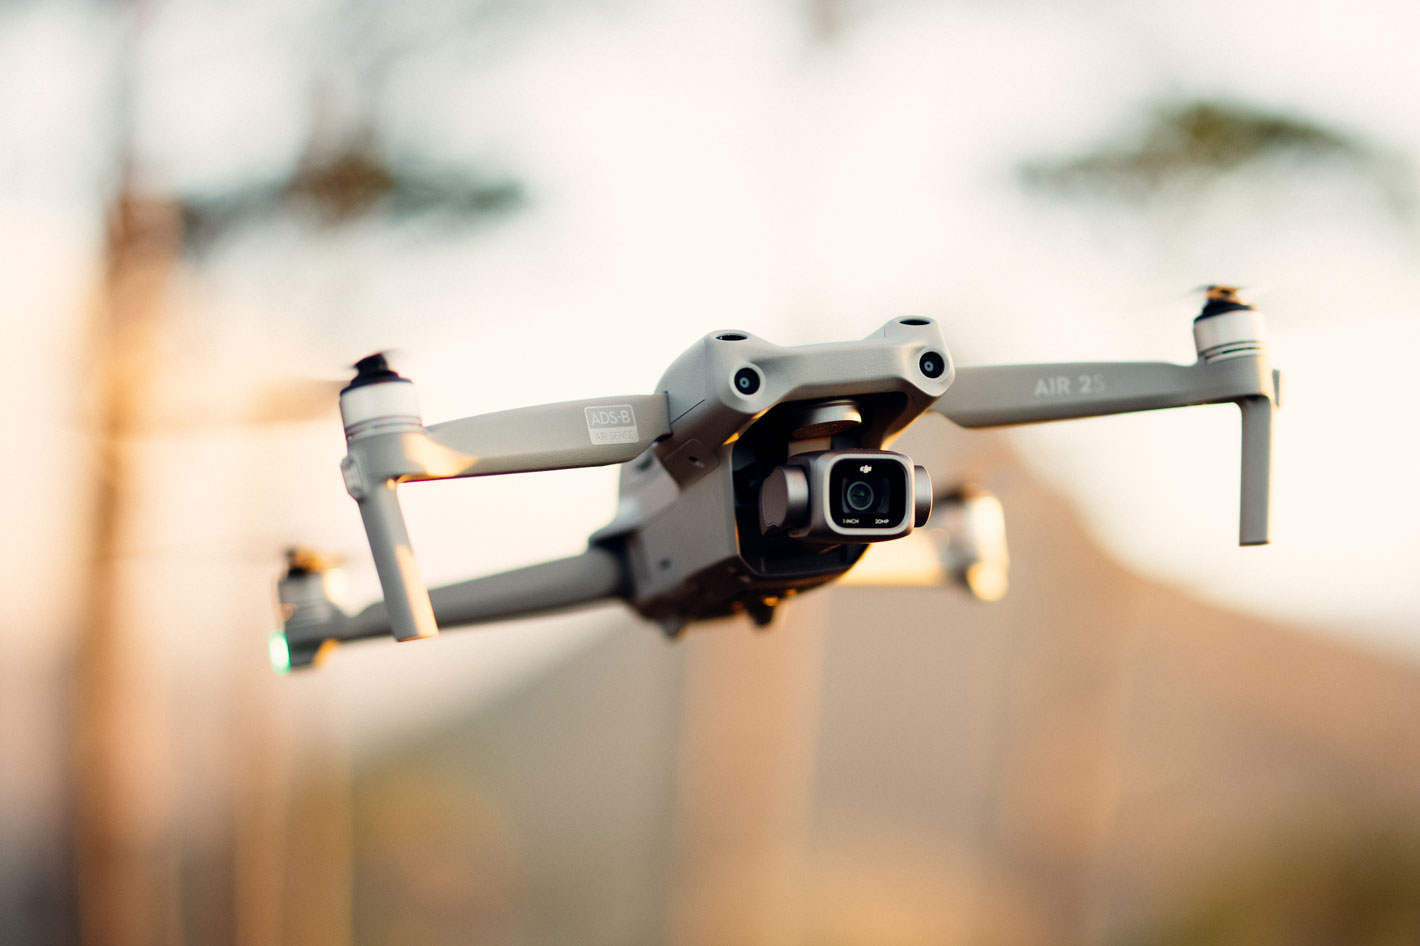 DJI Air 2S: the “all in one” for image capture